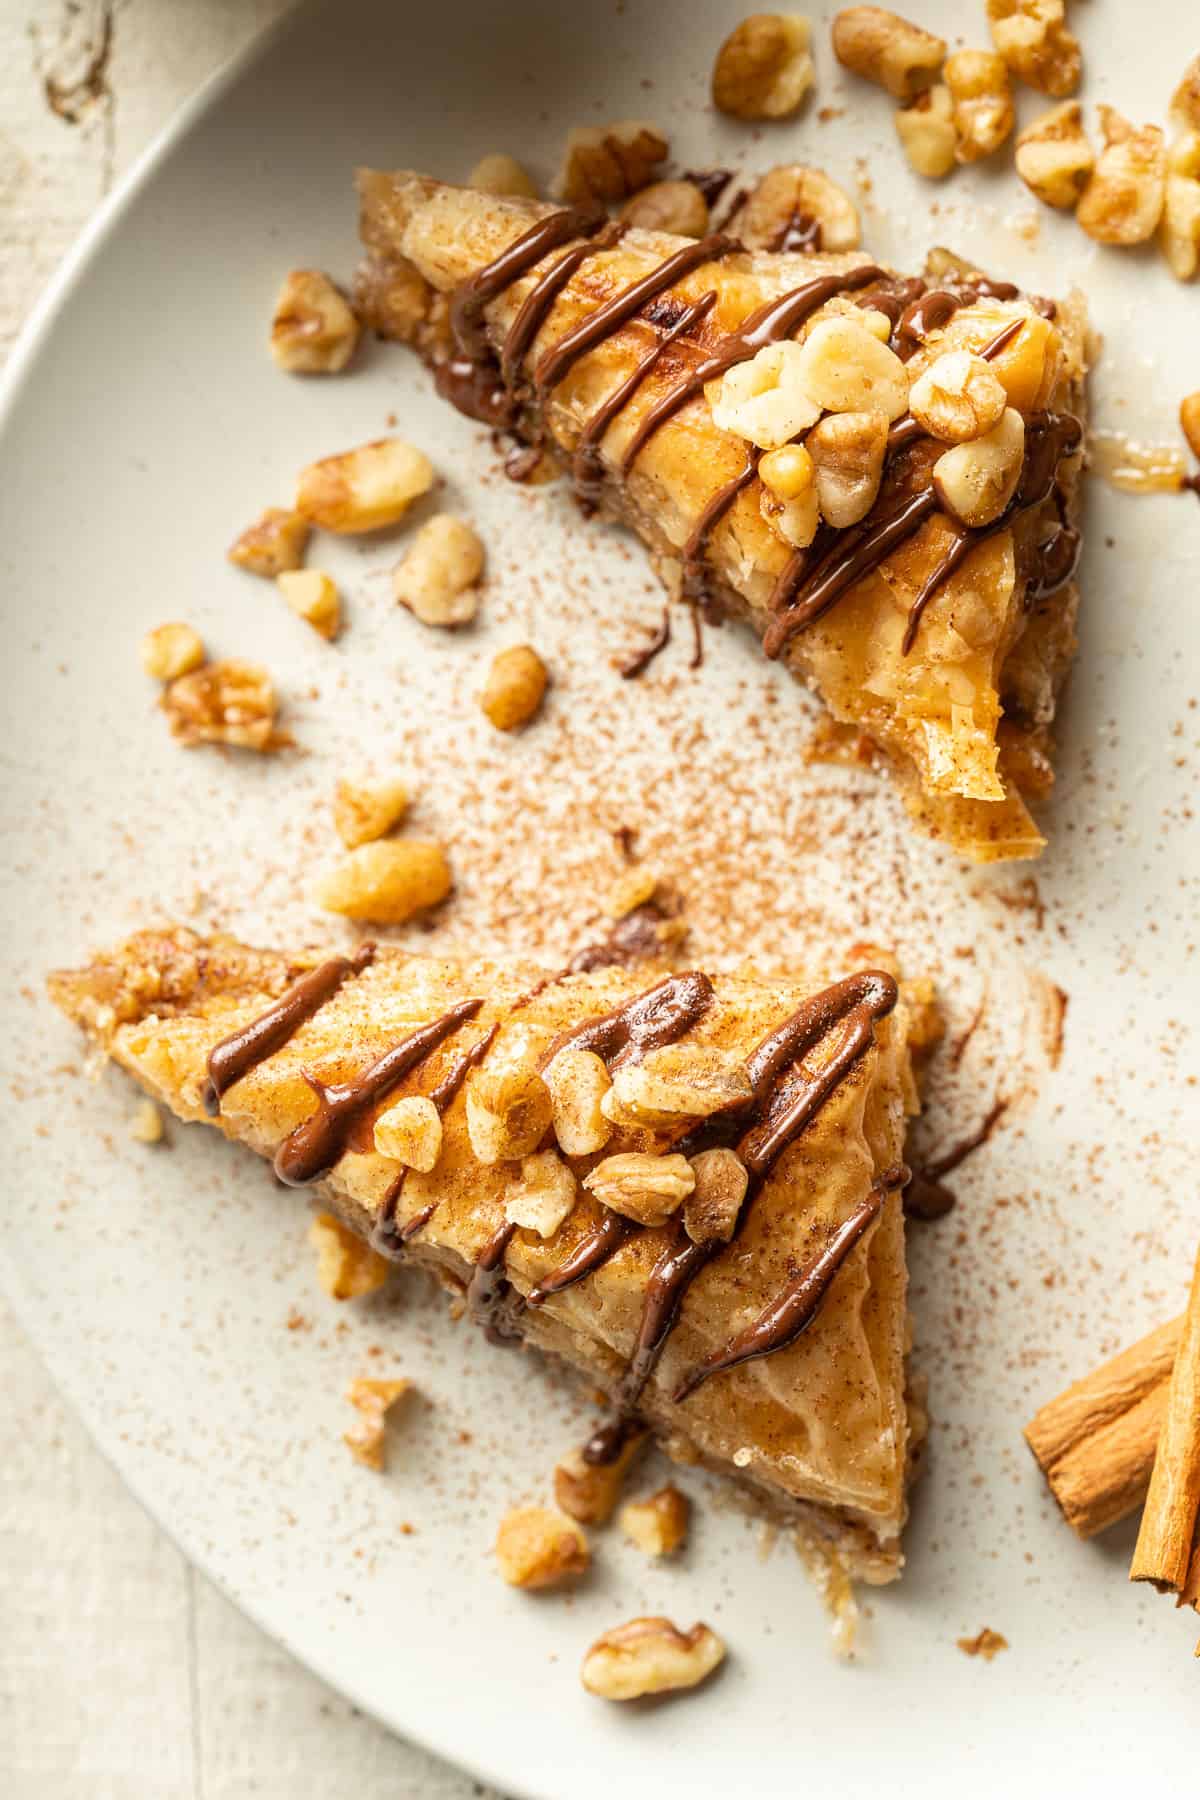 Two slices of Vegan Baklava on a dish with nuts and cinnamon sticks.